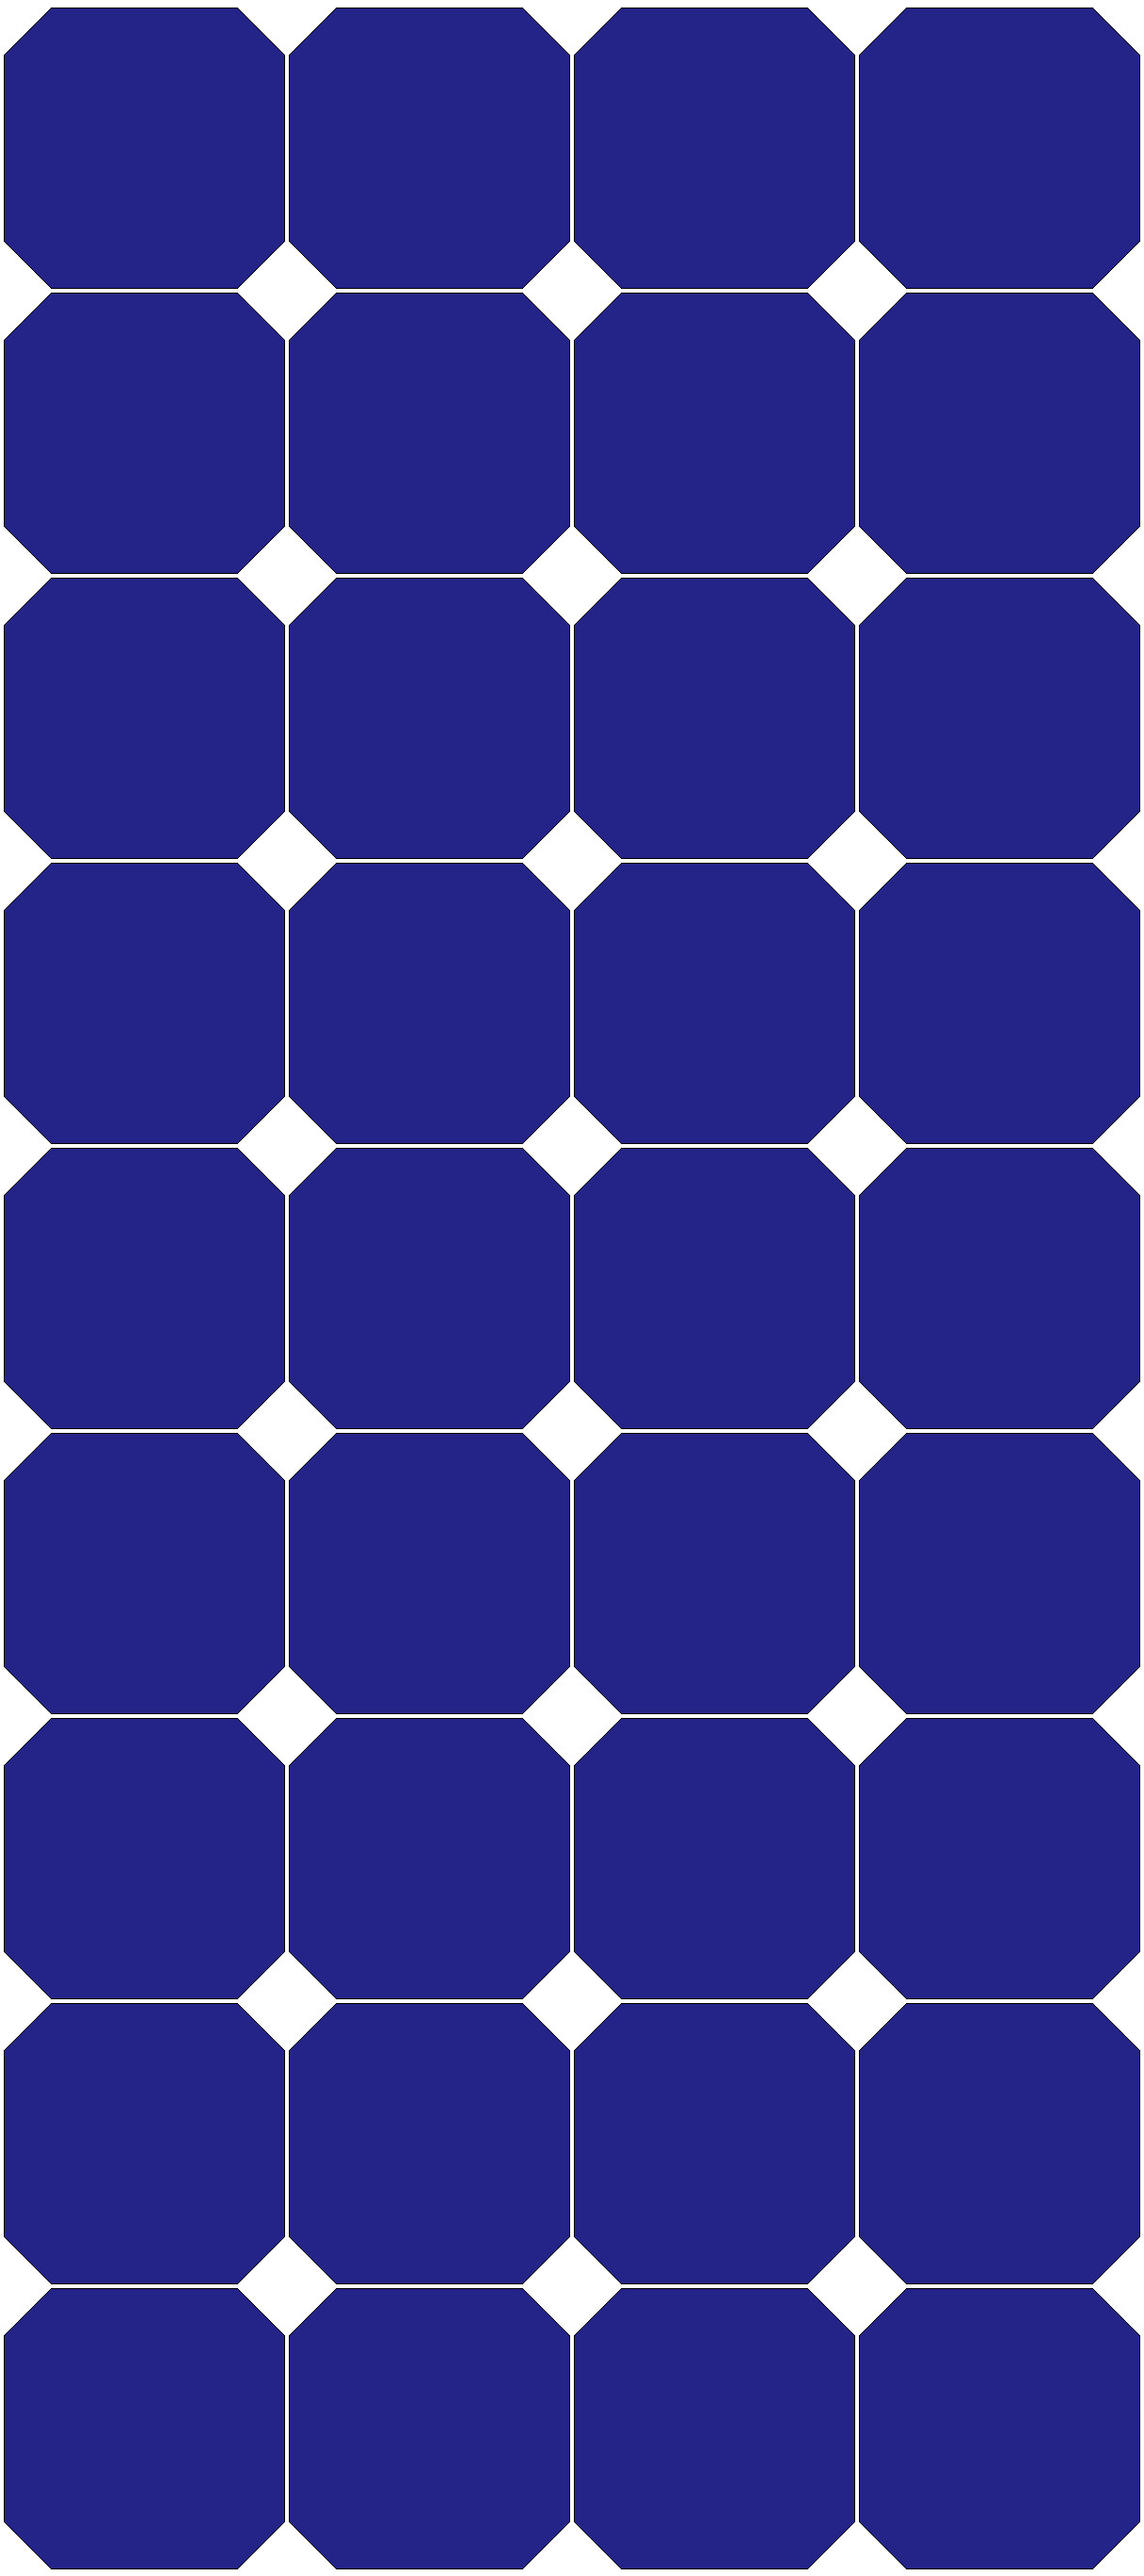 Free Solar Panel Cliparts, Download Free Solar Panel Cliparts png